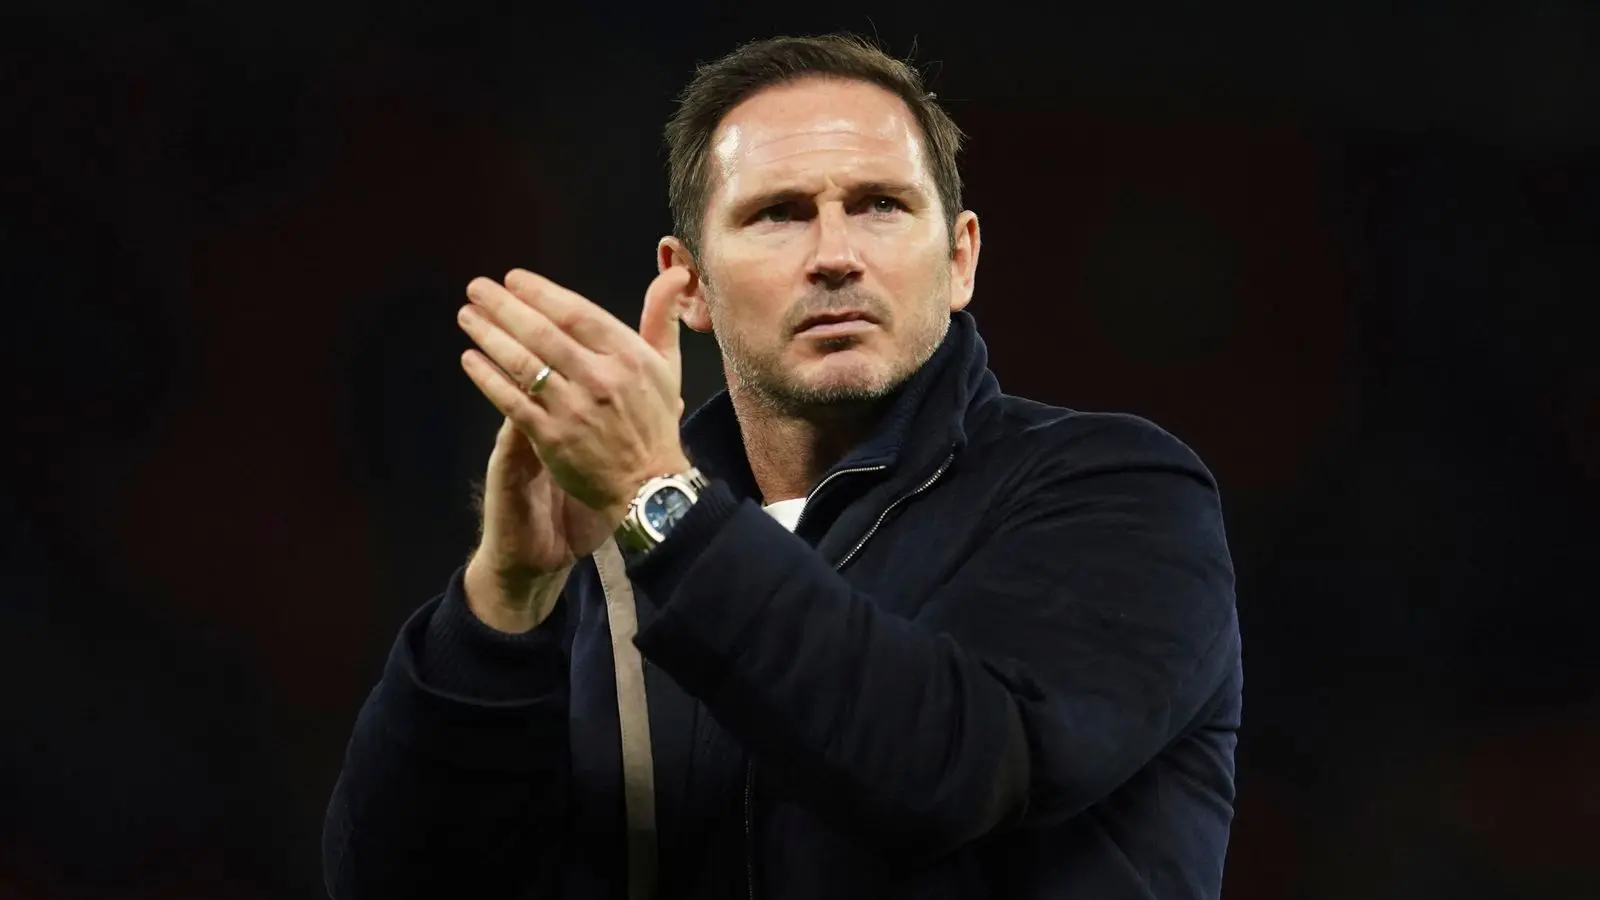 FA Cup: ‘You want him in front of goal’ – Lampard hails Chelsea star